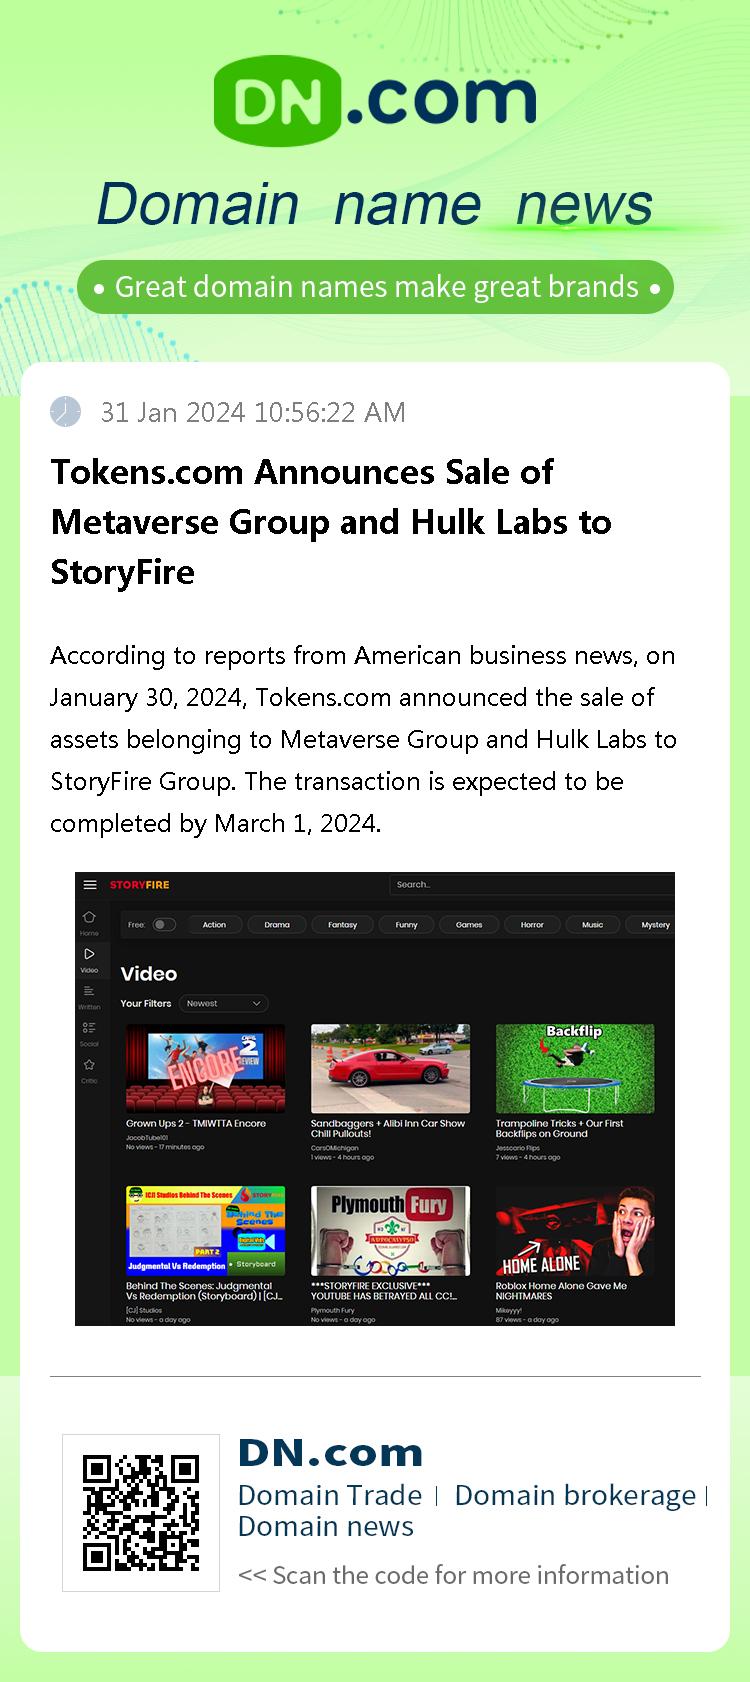 Tokens.com Announces Sale of Metaverse Group and Hulk Labs to StoryFire